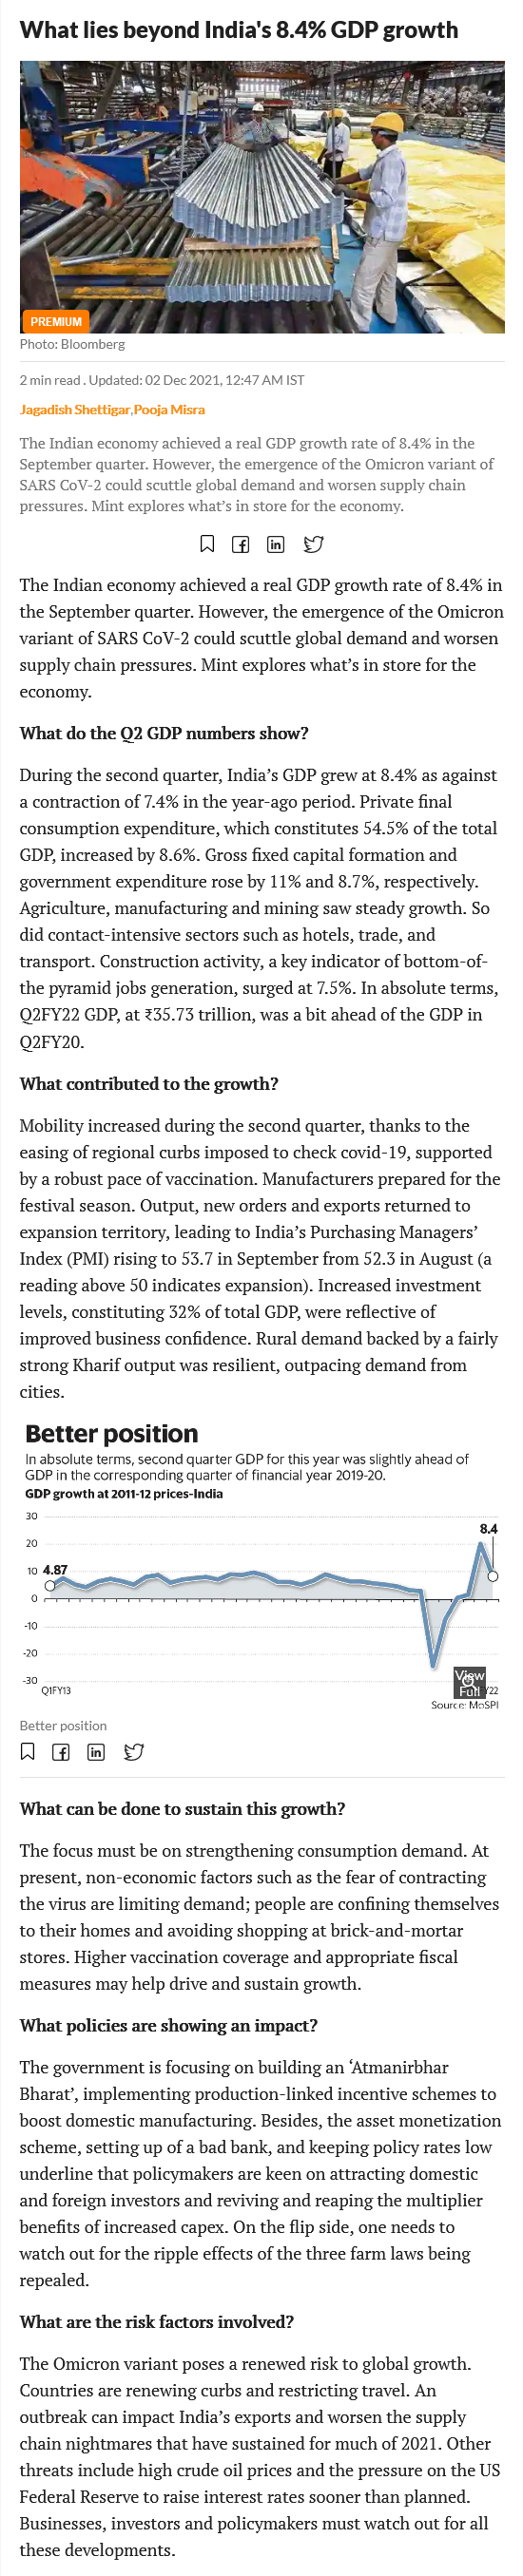 Screenshot 2021-12-02 at 22-45-47 What lies beyond India's 8 4% GDP growth.png